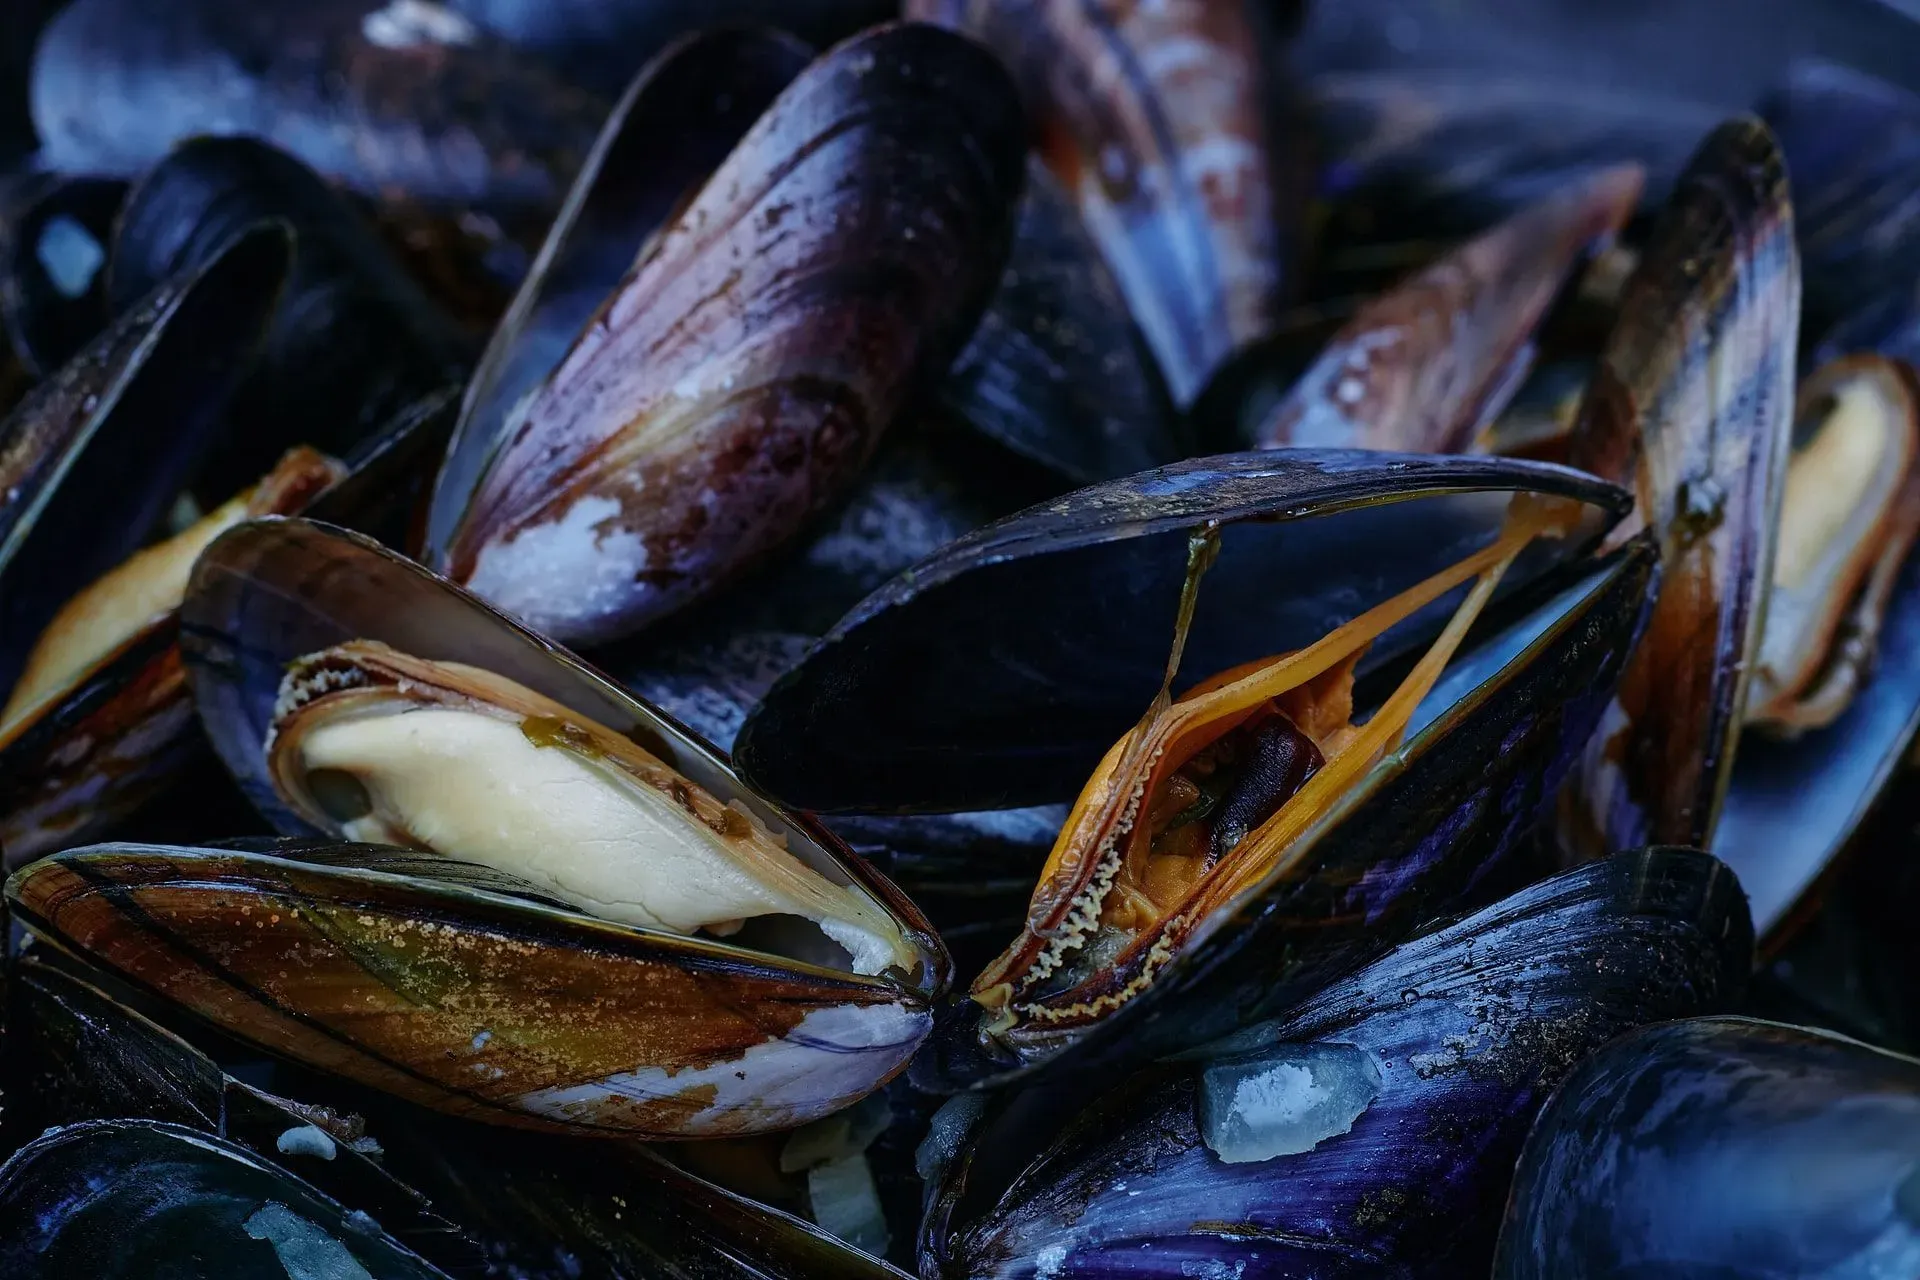 Know the enthralling fun facts about mussels vs. clams and which is better.